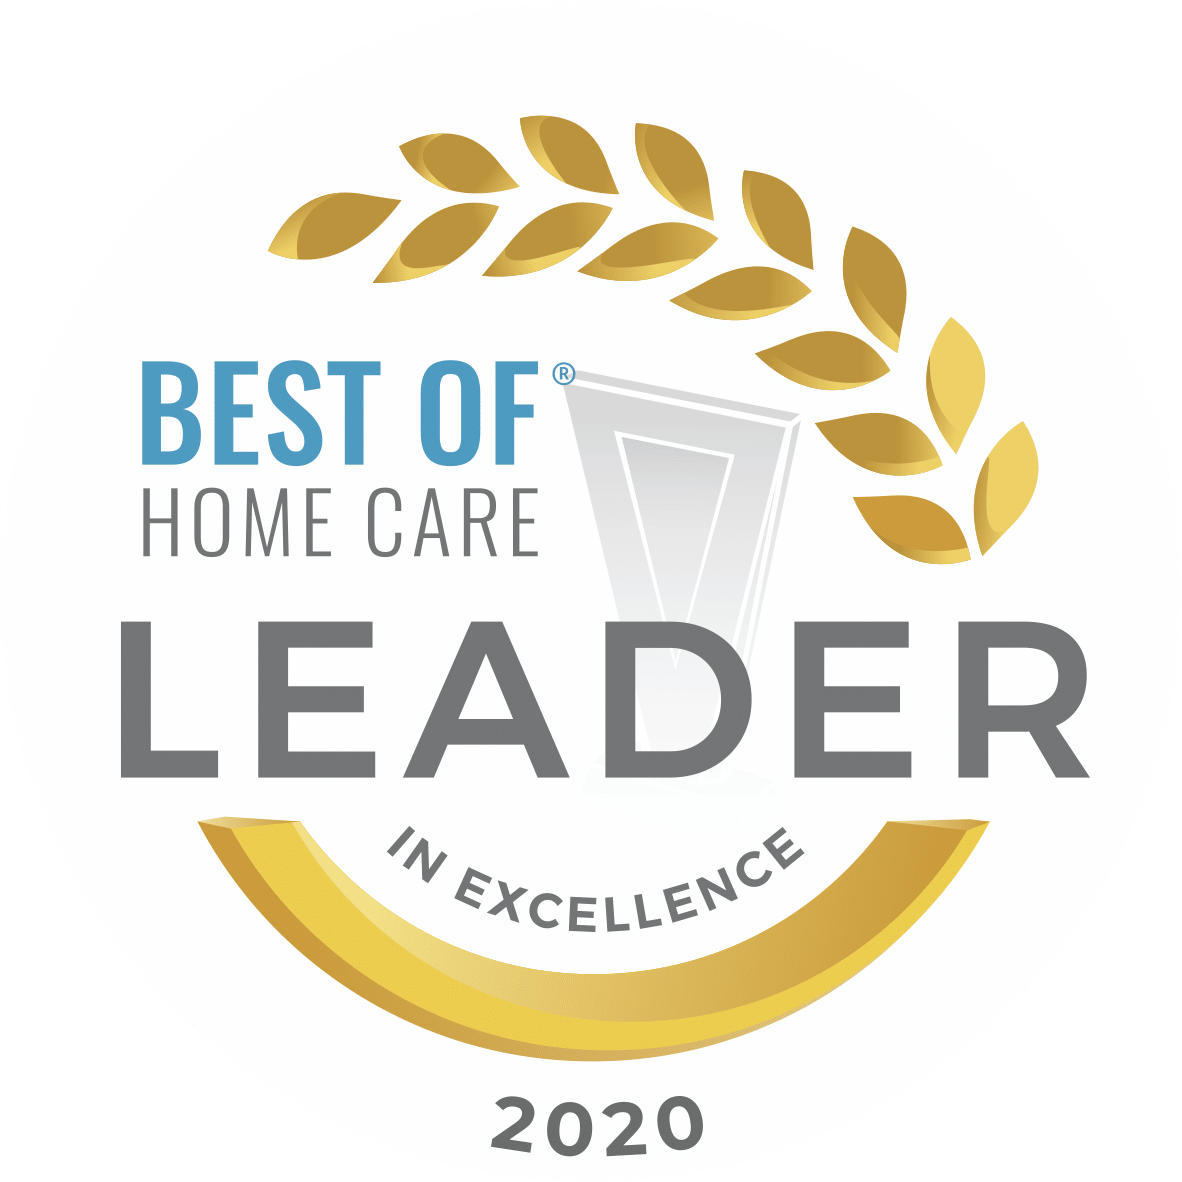 Best of Home Care Leader in Excellence 2020 award